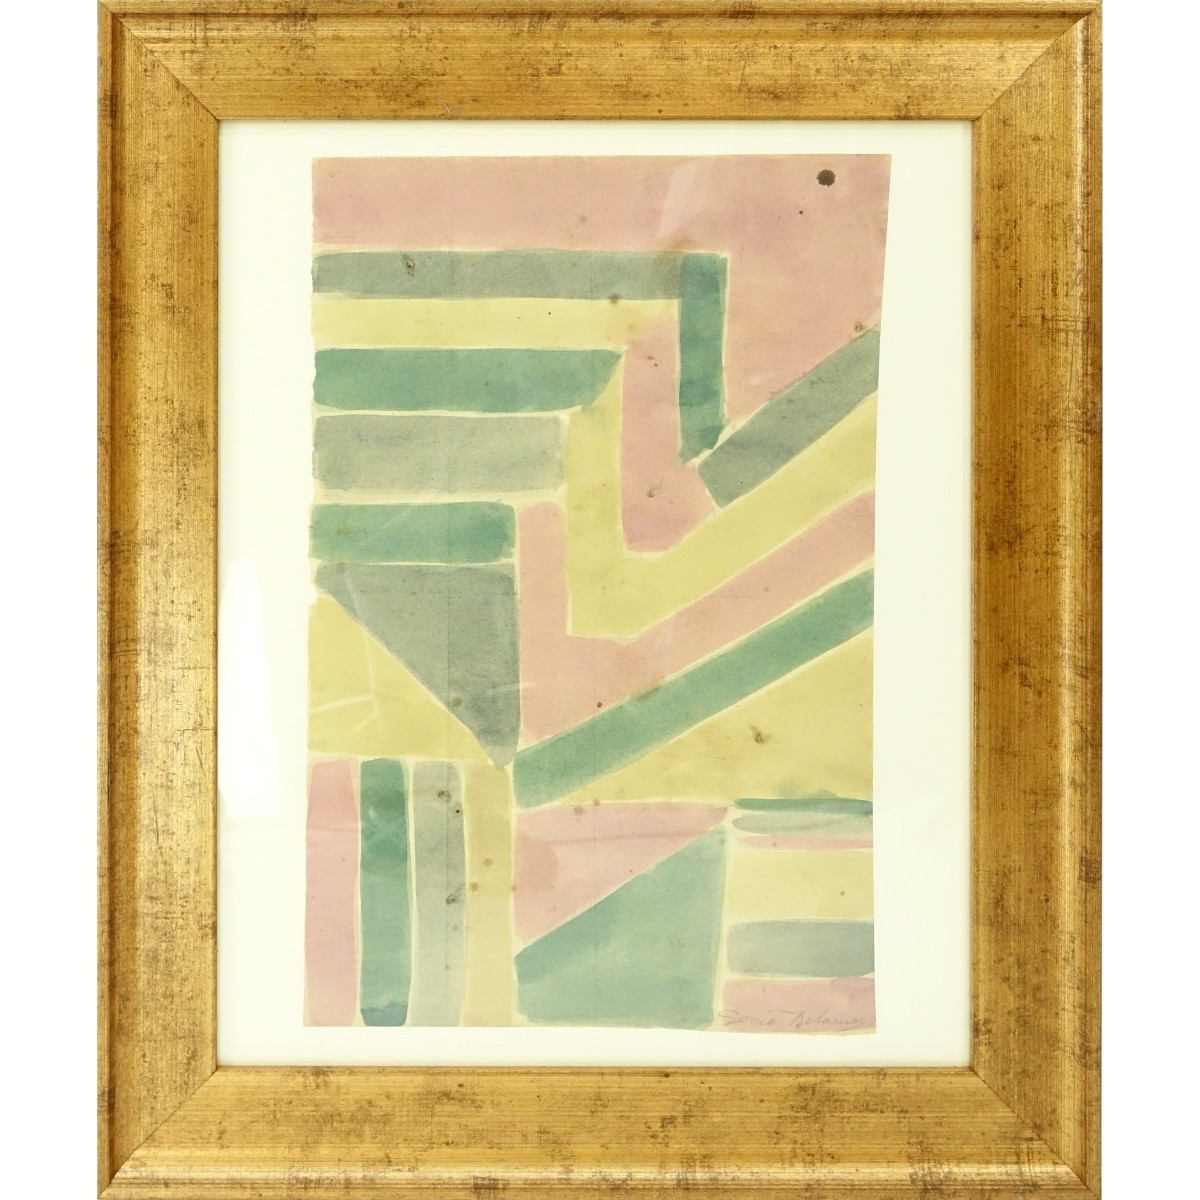 Attributed to: Sonia Delaunay, French W/C